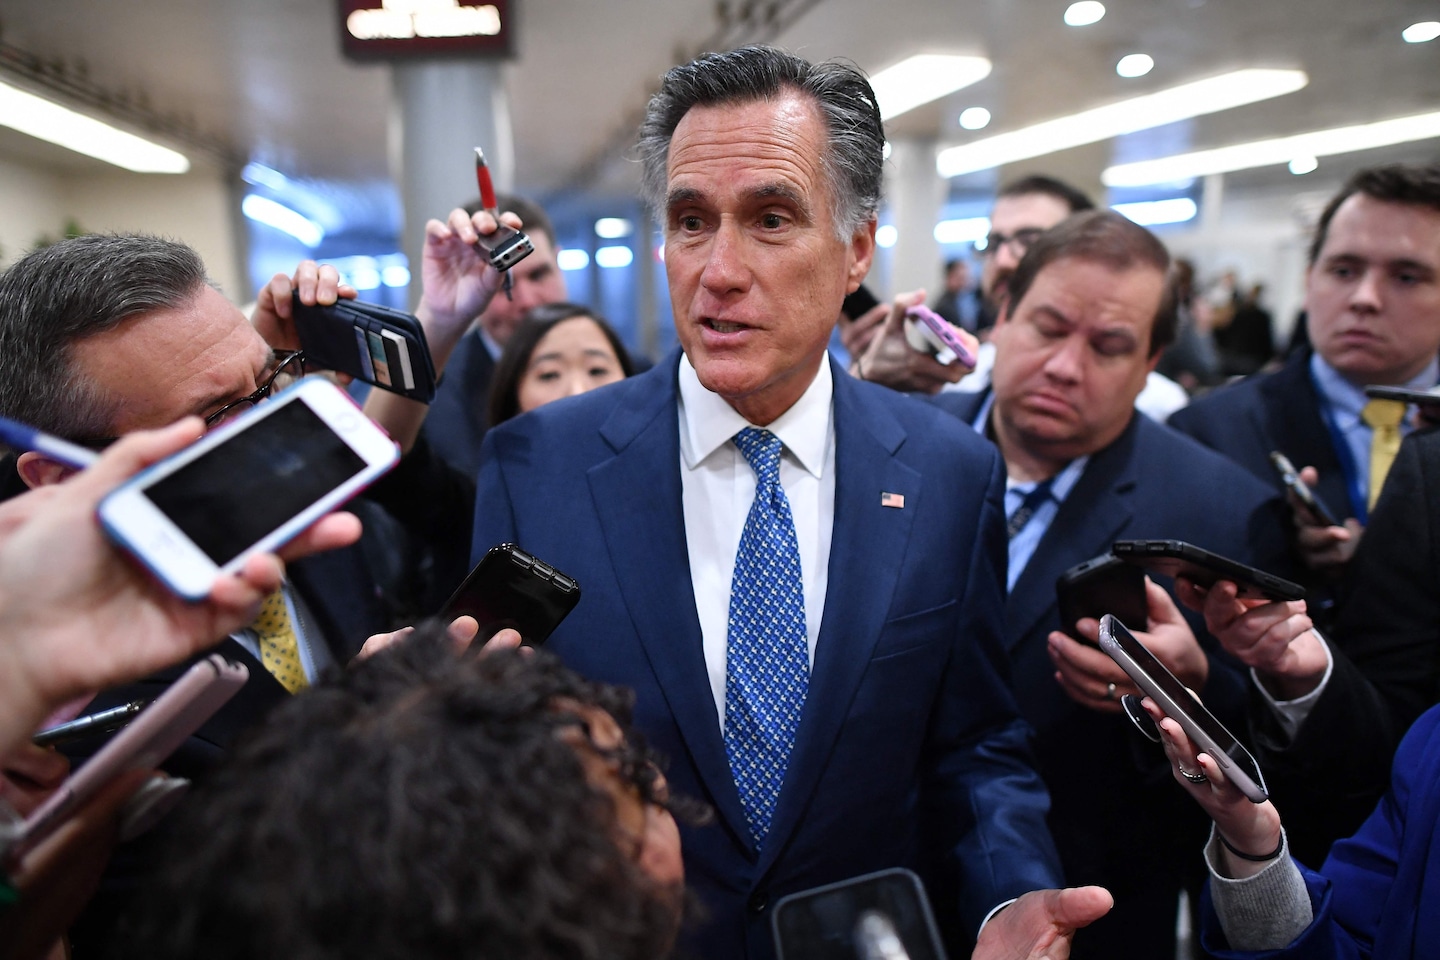 Romney bows out, leaving a legacy that would make his father proud